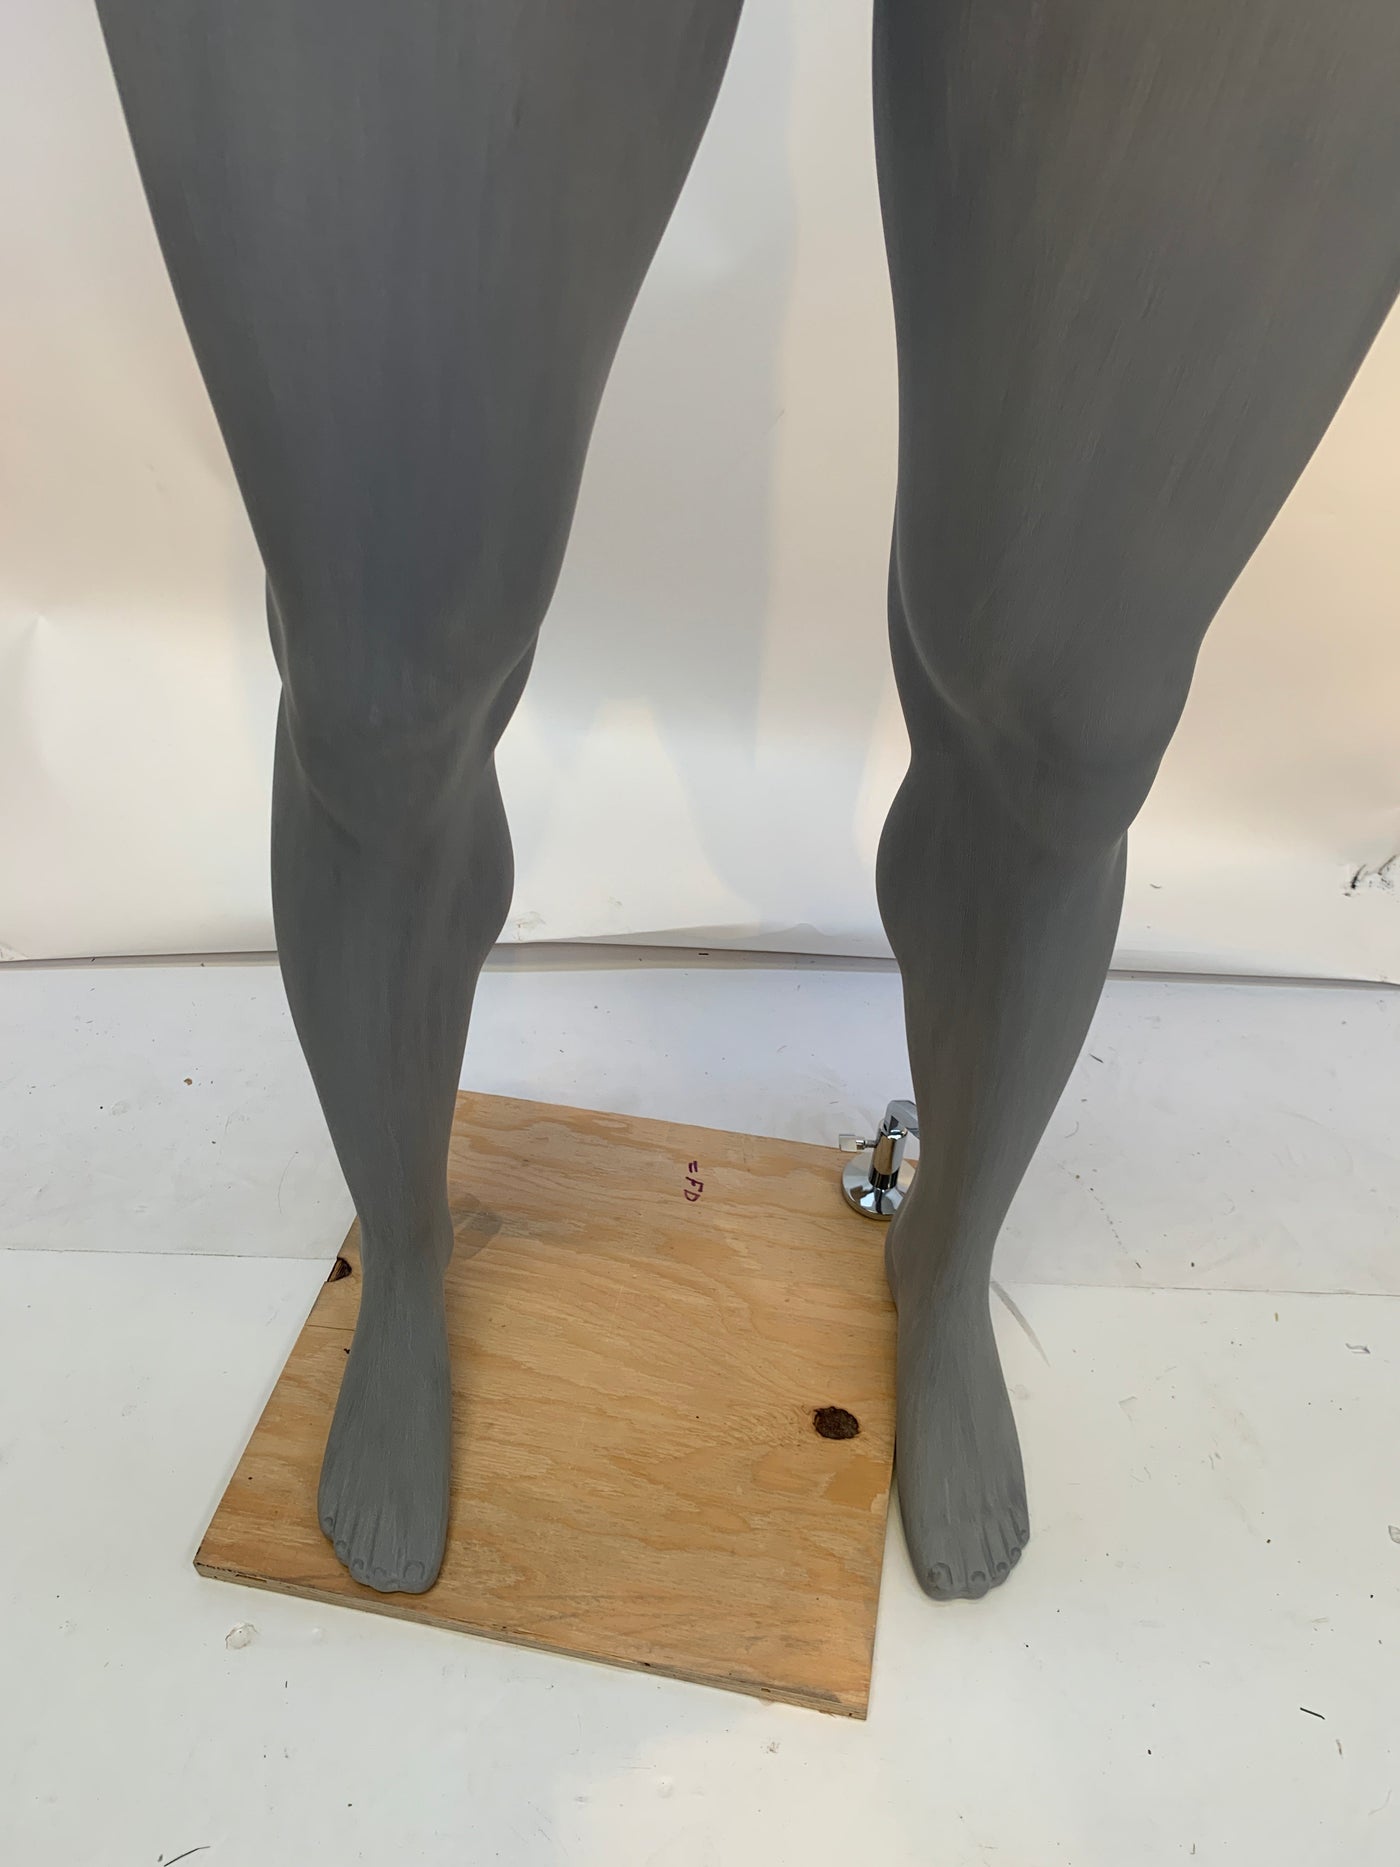 Used Male Mannequin Athletic Legs